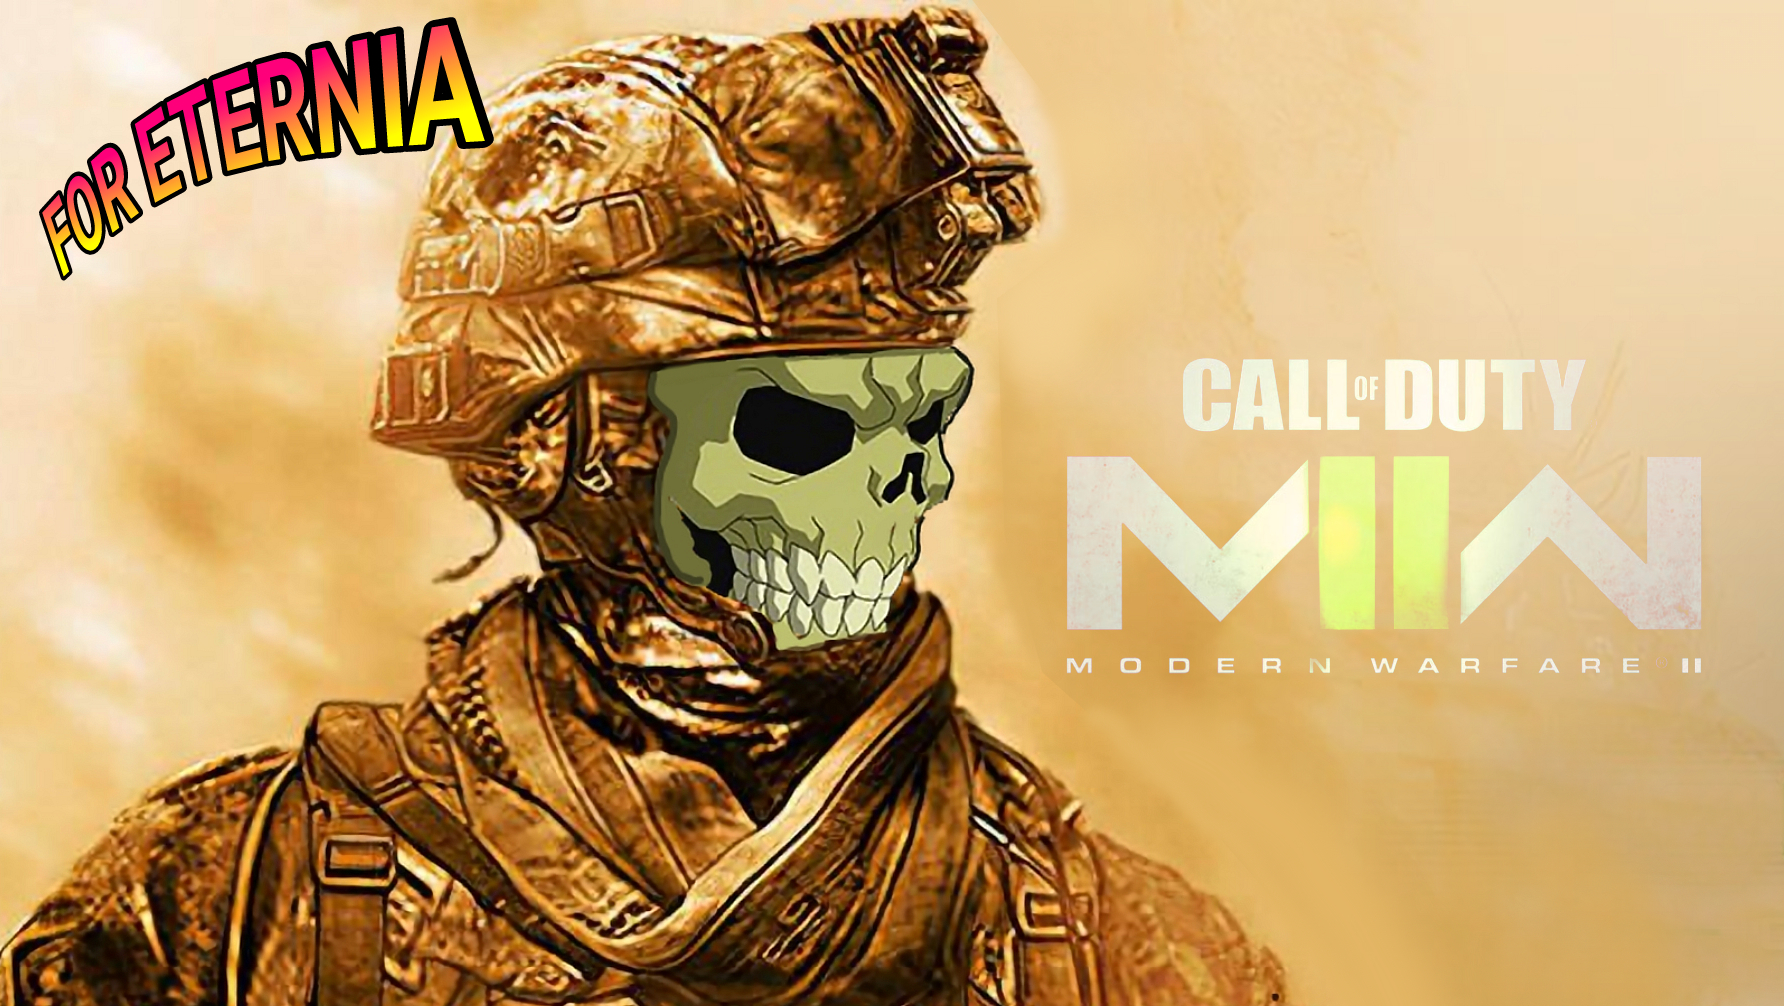 Modern Warfare 2 Leak Suggests Skeletor will be Reporting for Duty… Call of Duty!